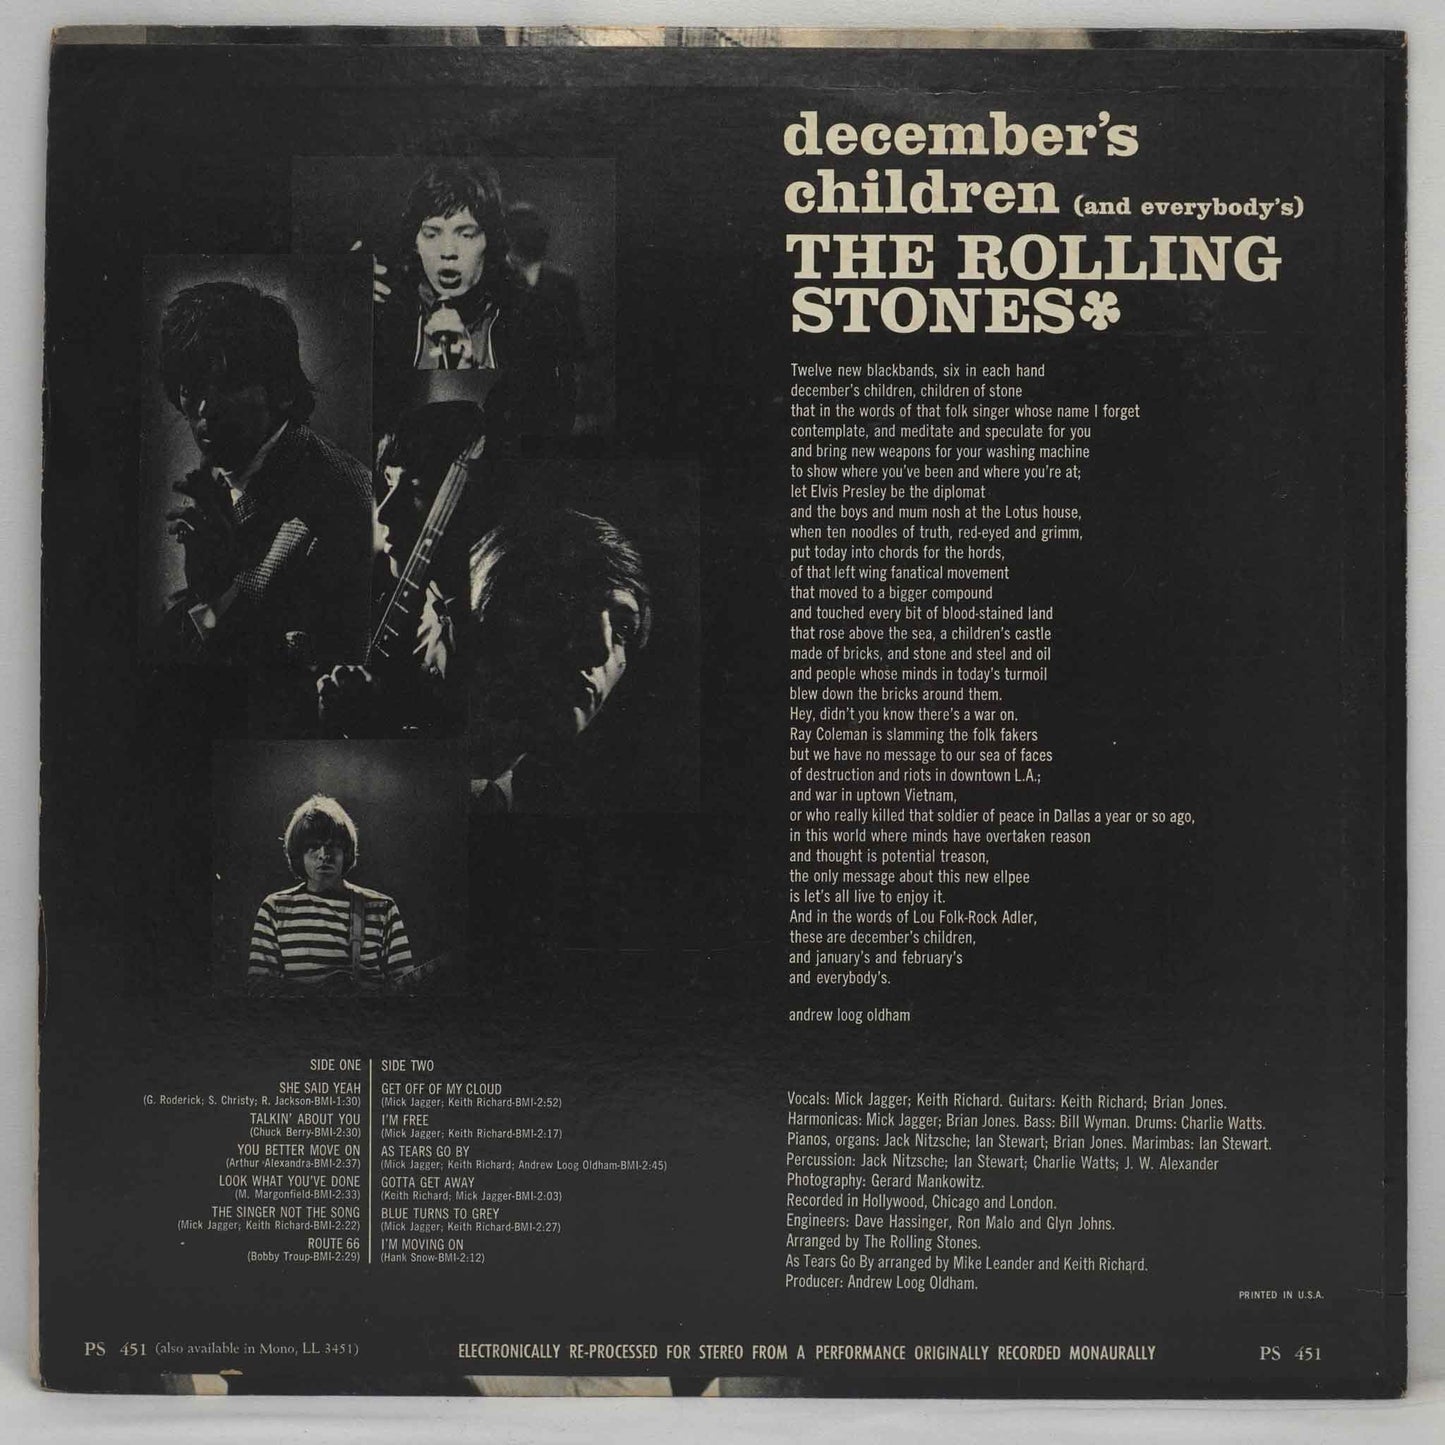 The Rolling Stones – December's Children (And Everybody's)